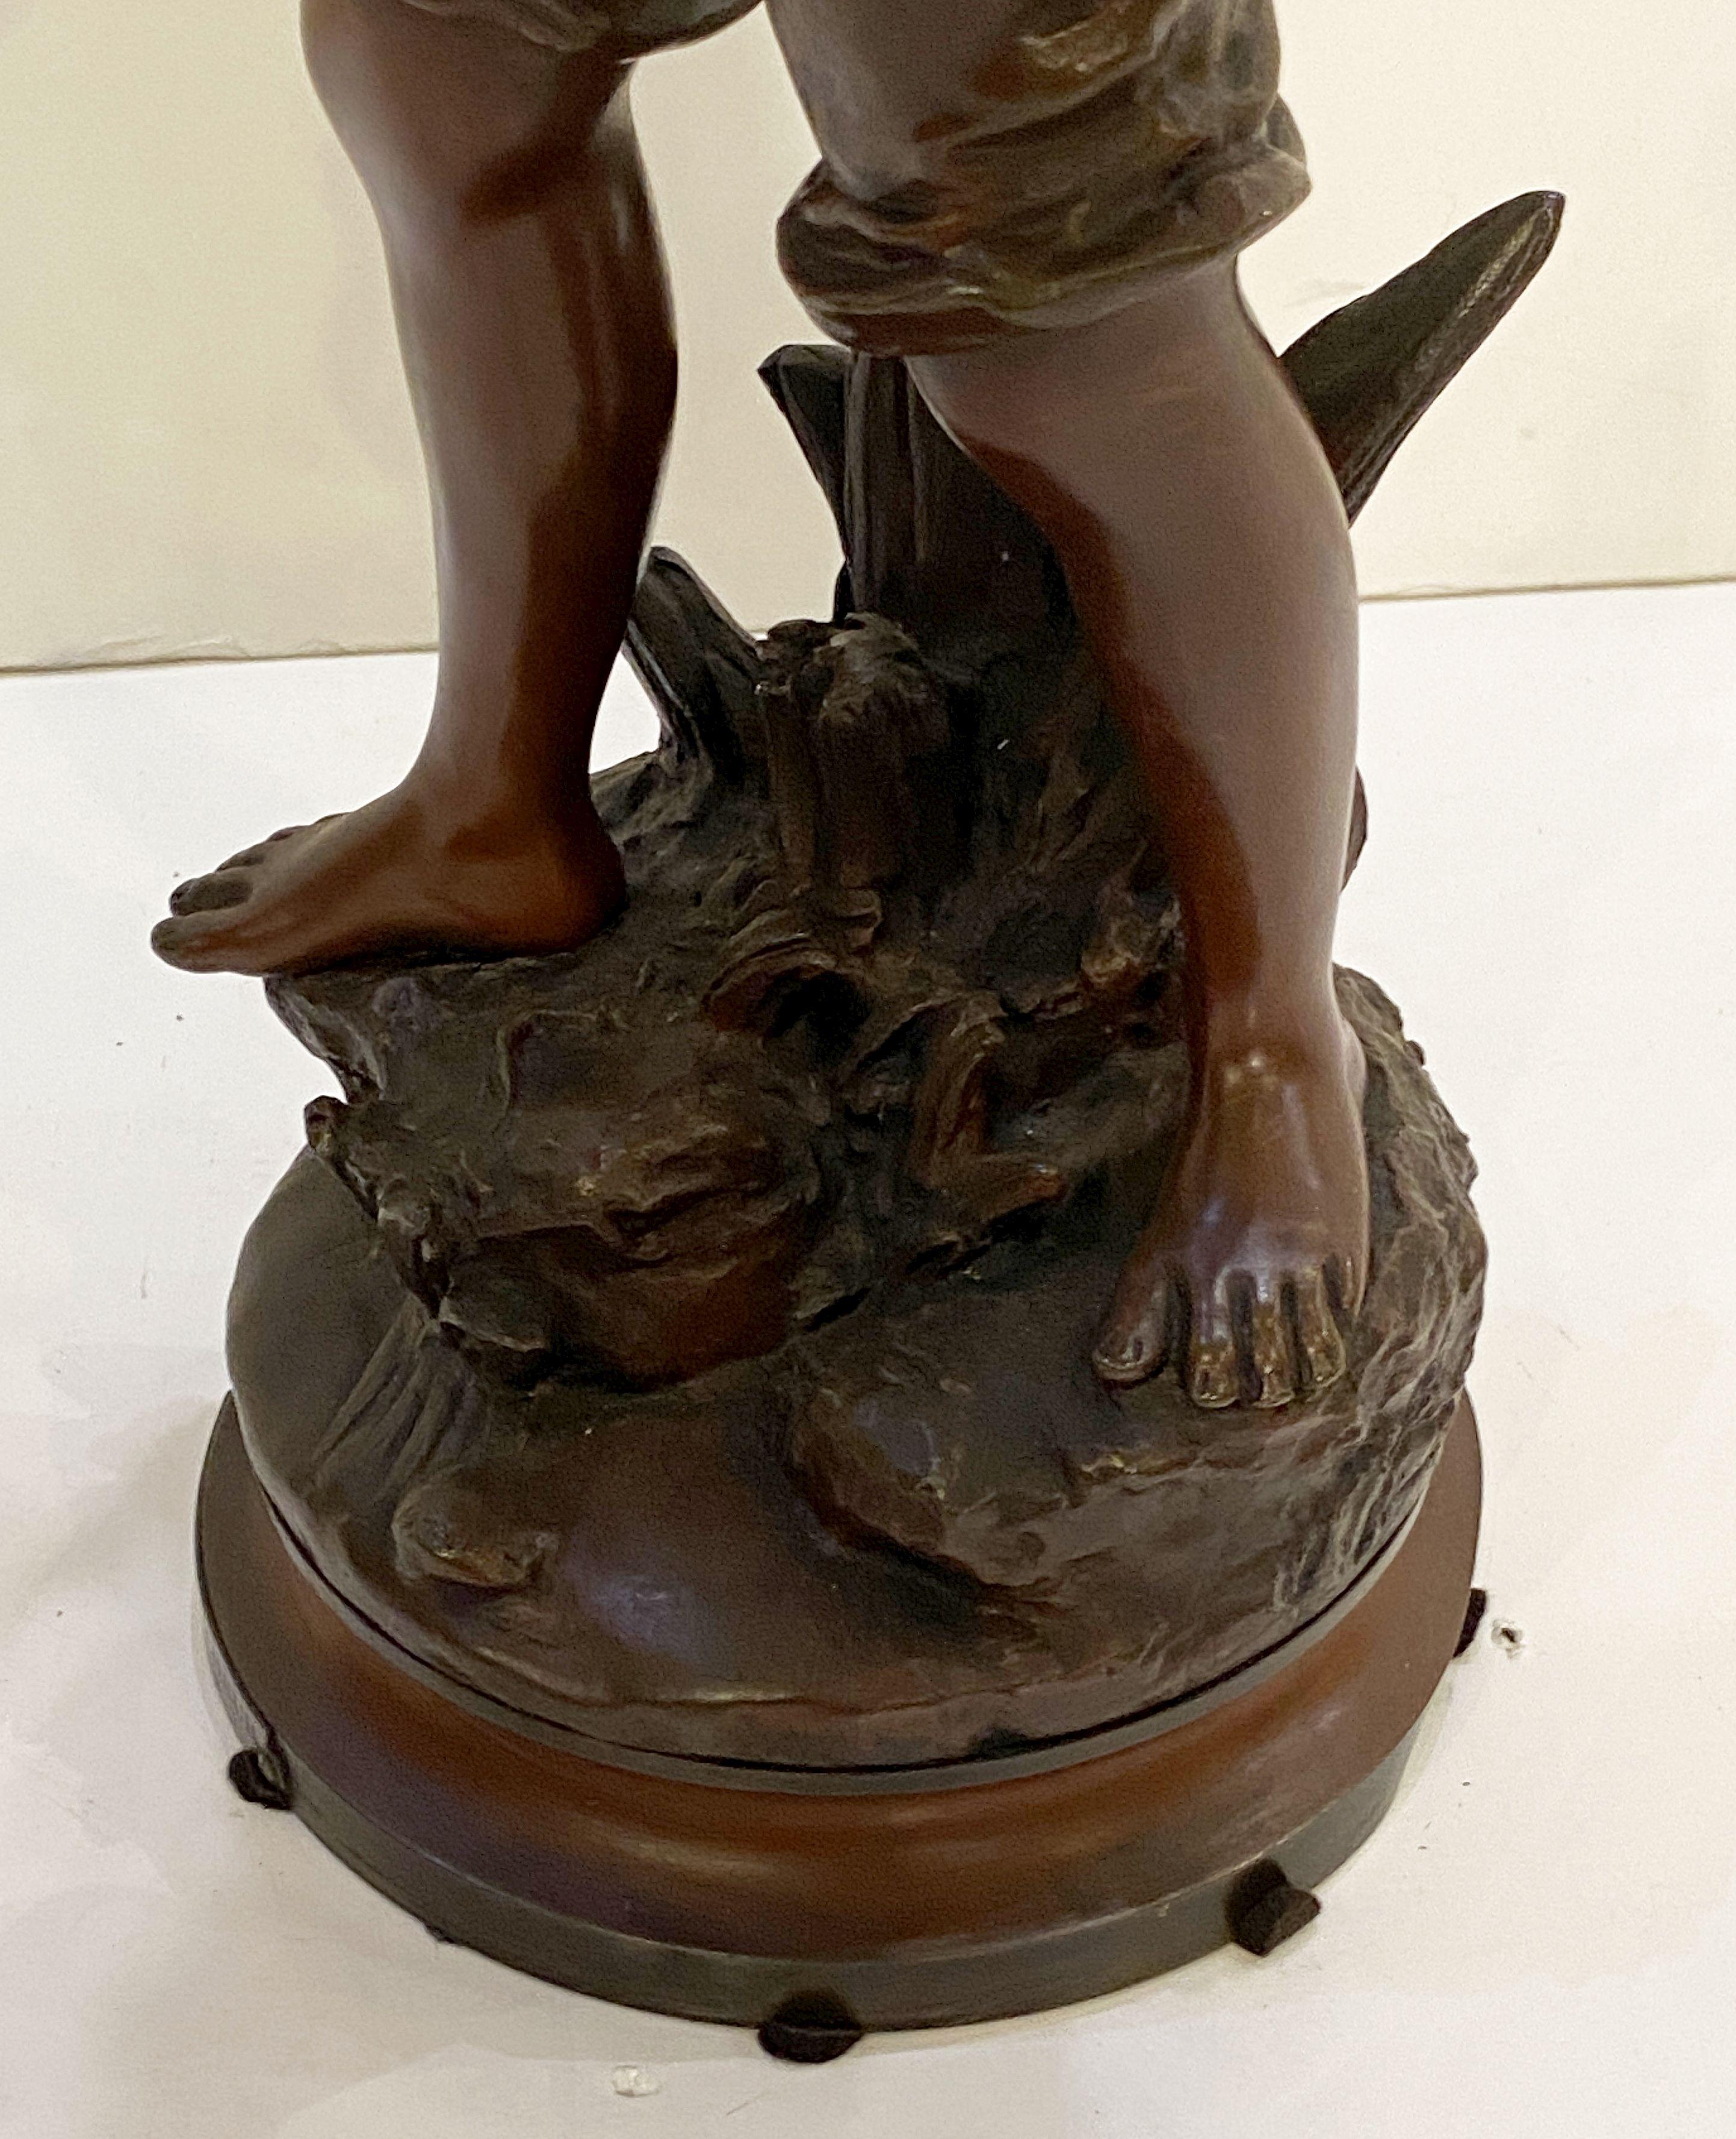 Heureux Pêcheur or Happy Fisherboy Bronze Sculptural Figure by Charles Anfrie  8